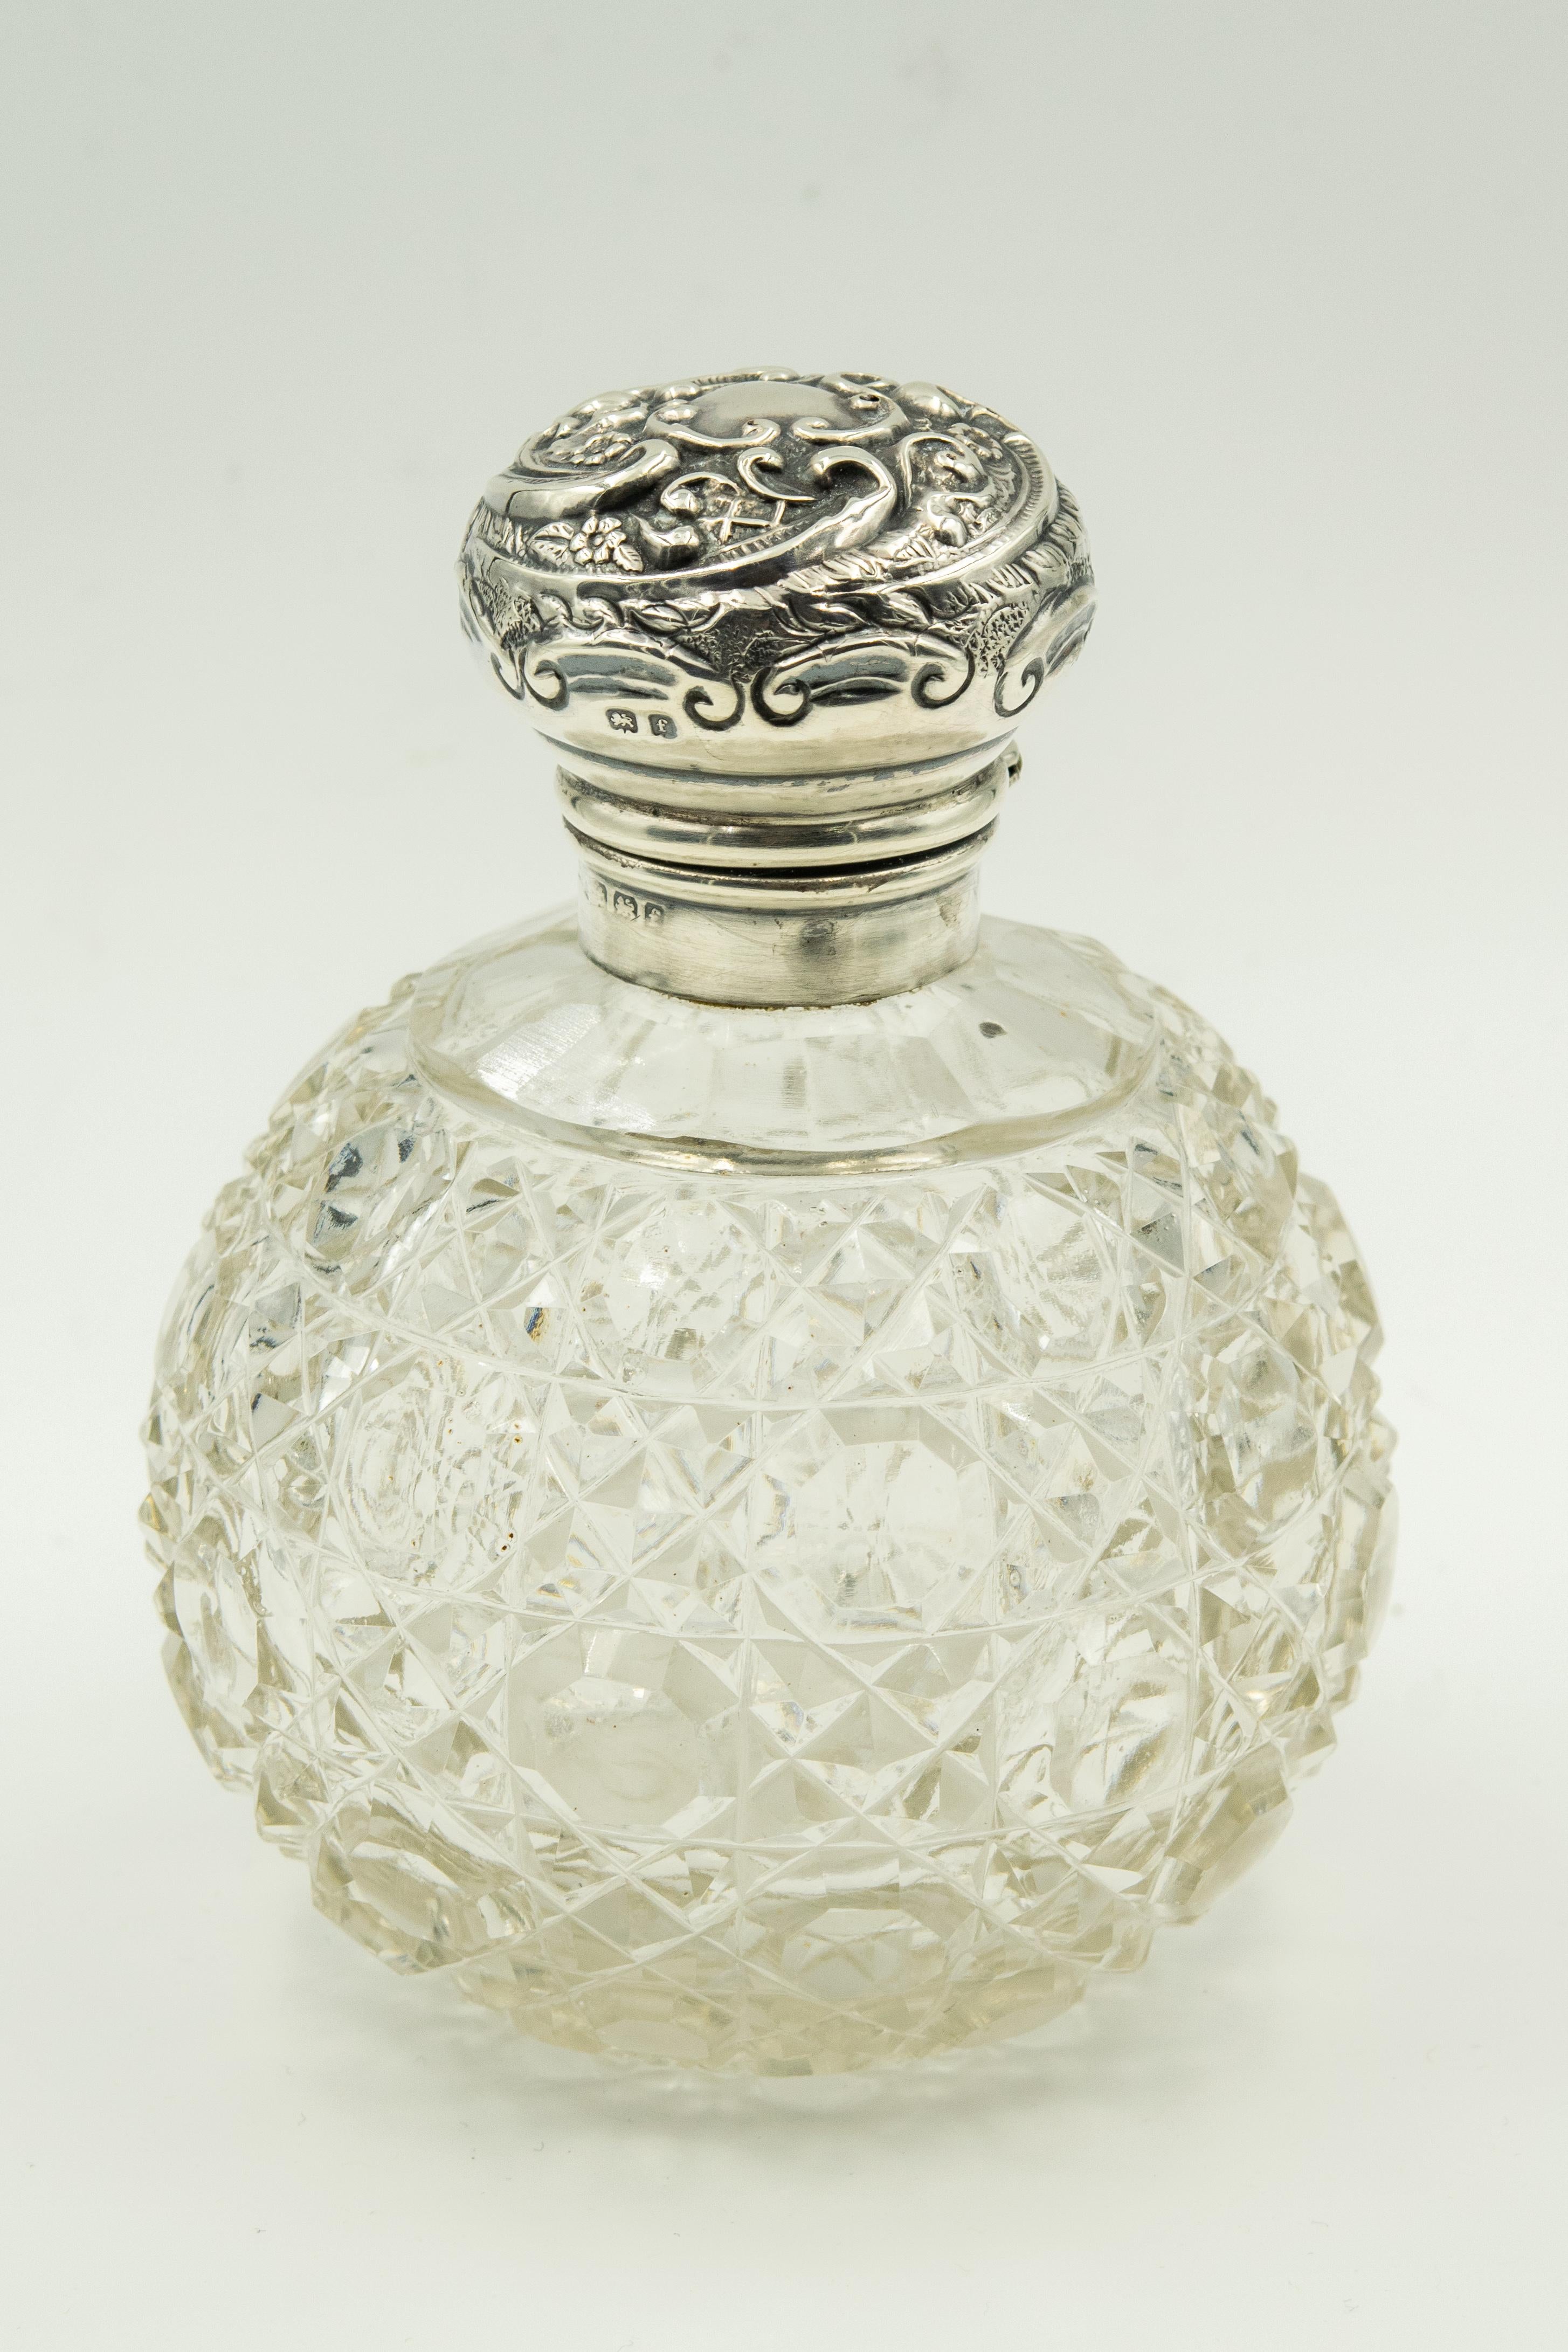 Beautiful English cut crystal perfume bottle with a sterling silver hinged top. The silver mount has a high relief repoussé scroll and flower pattern. The stopper is missing.

Hallmarks for England Birmingham and date letter F for 1905. The makers